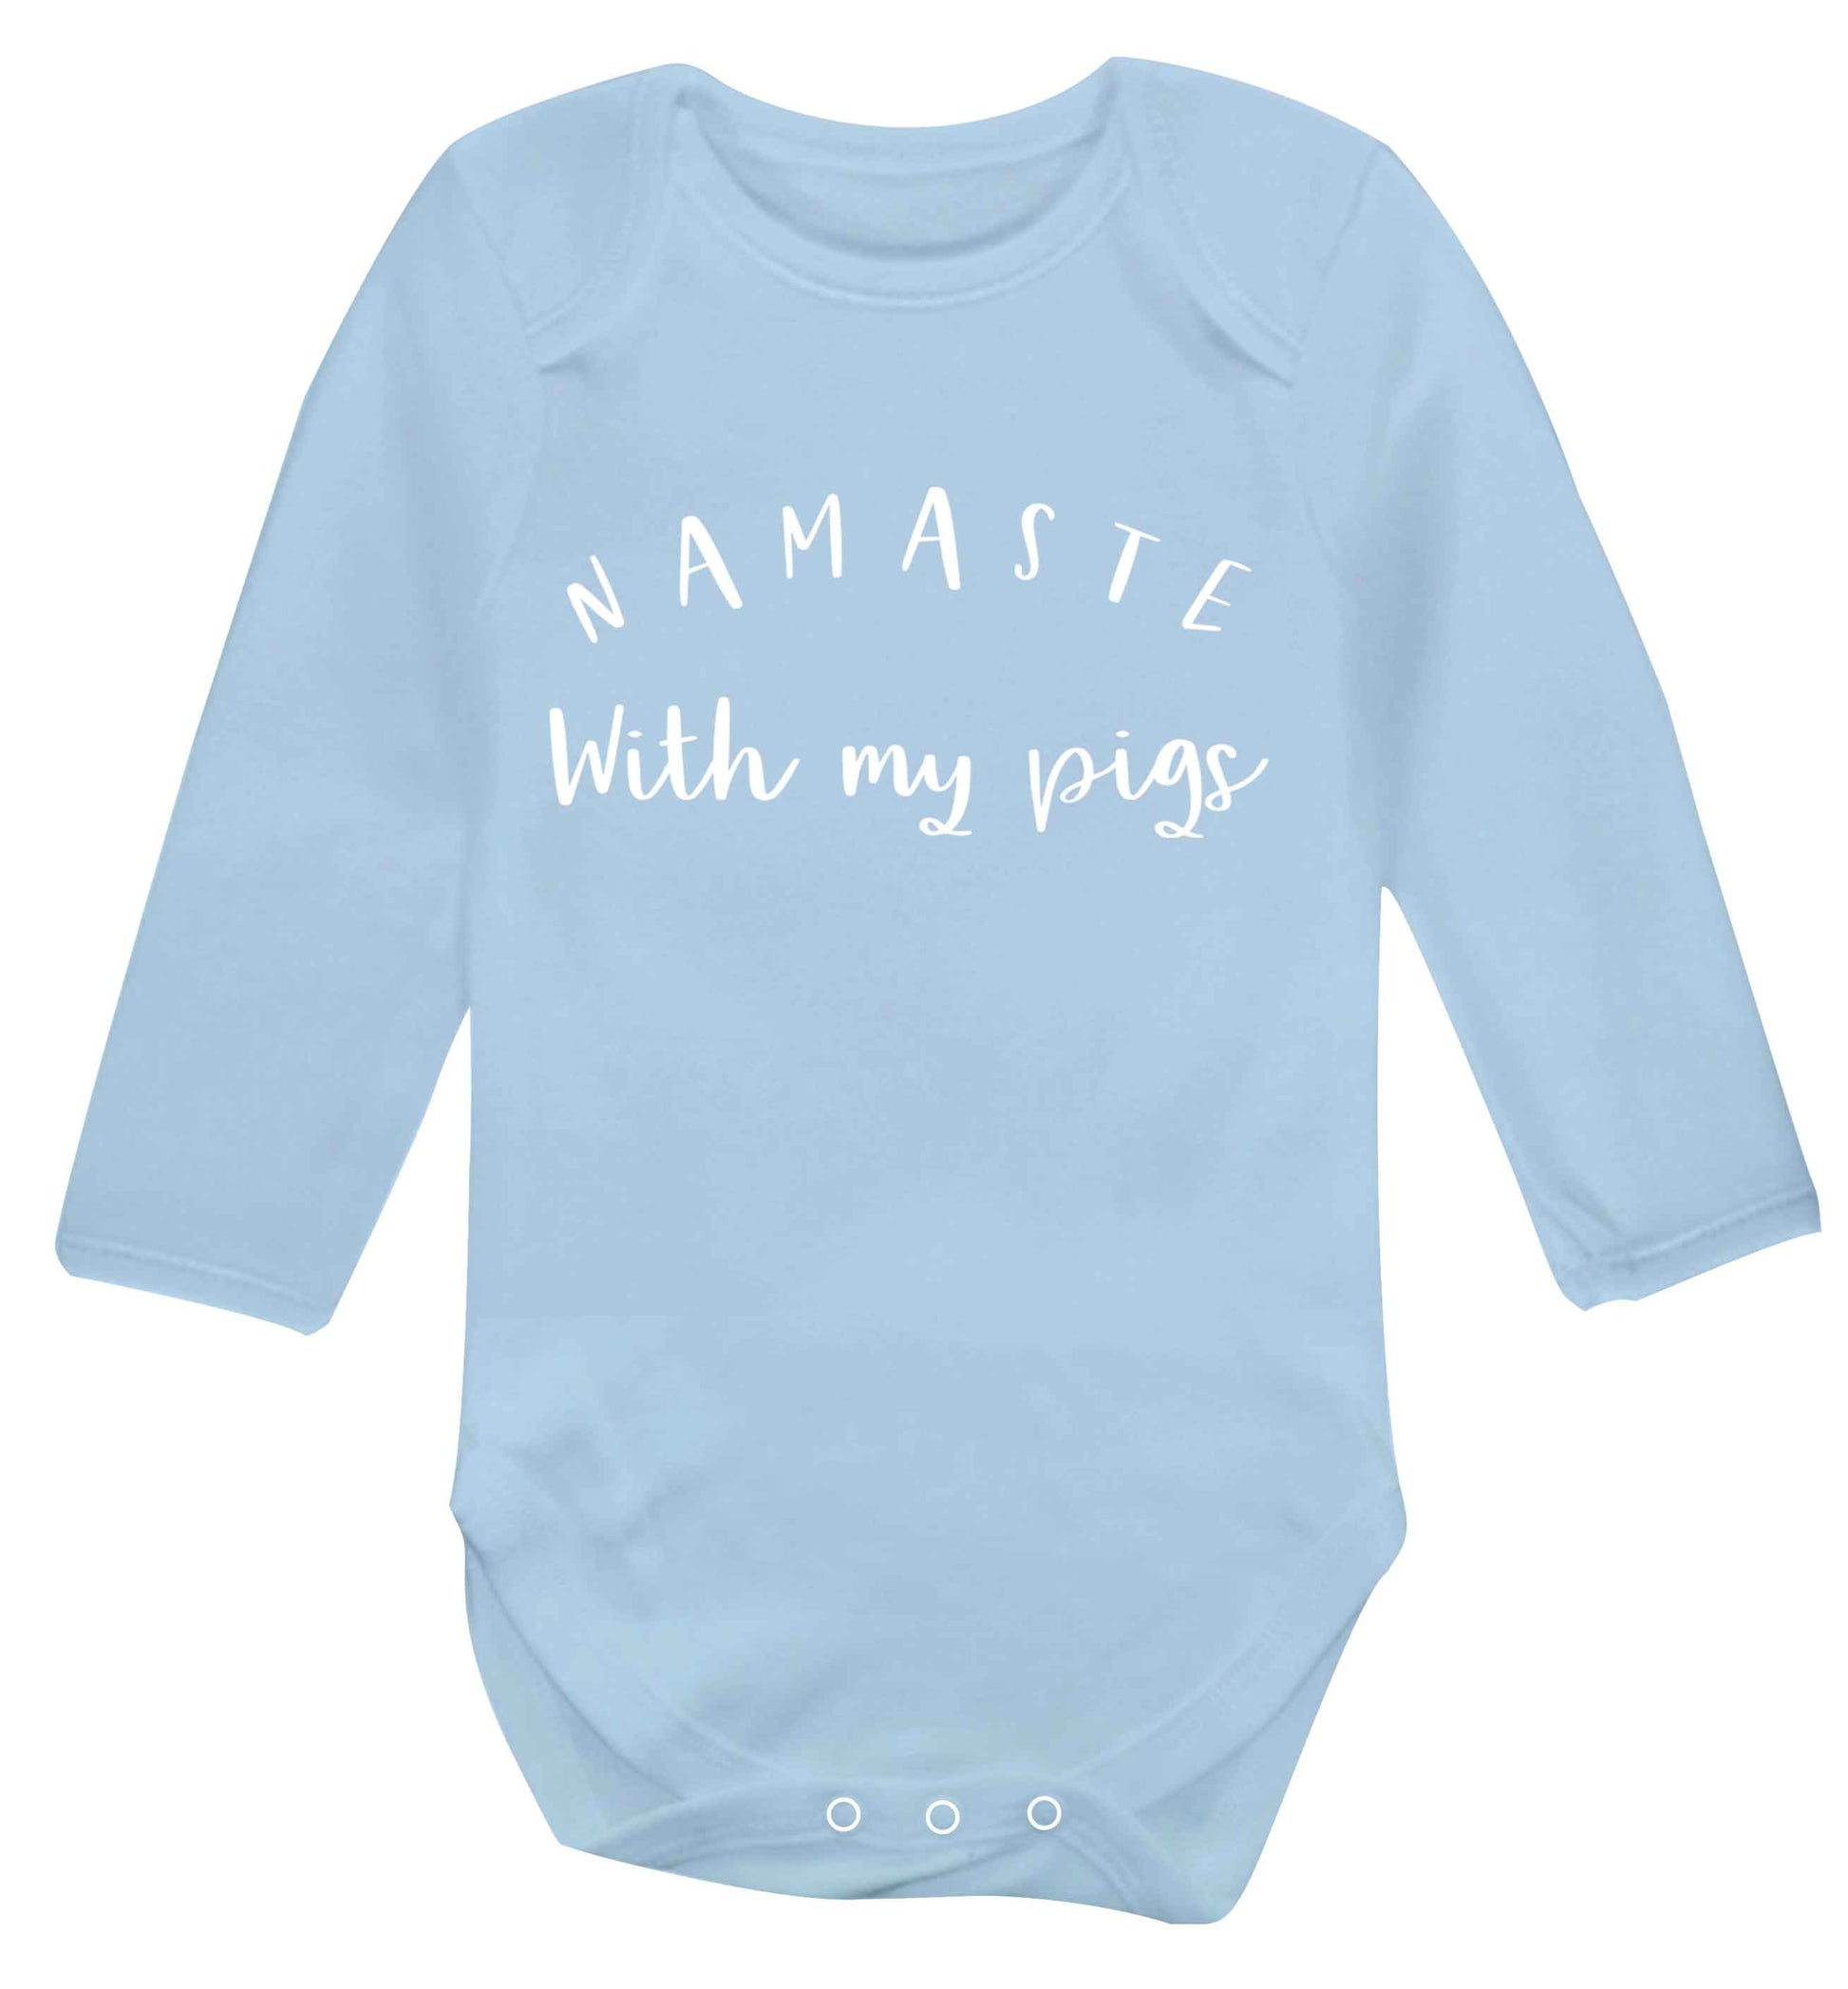 Namaste with my pigs Baby Vest long sleeved pale blue 6-12 months